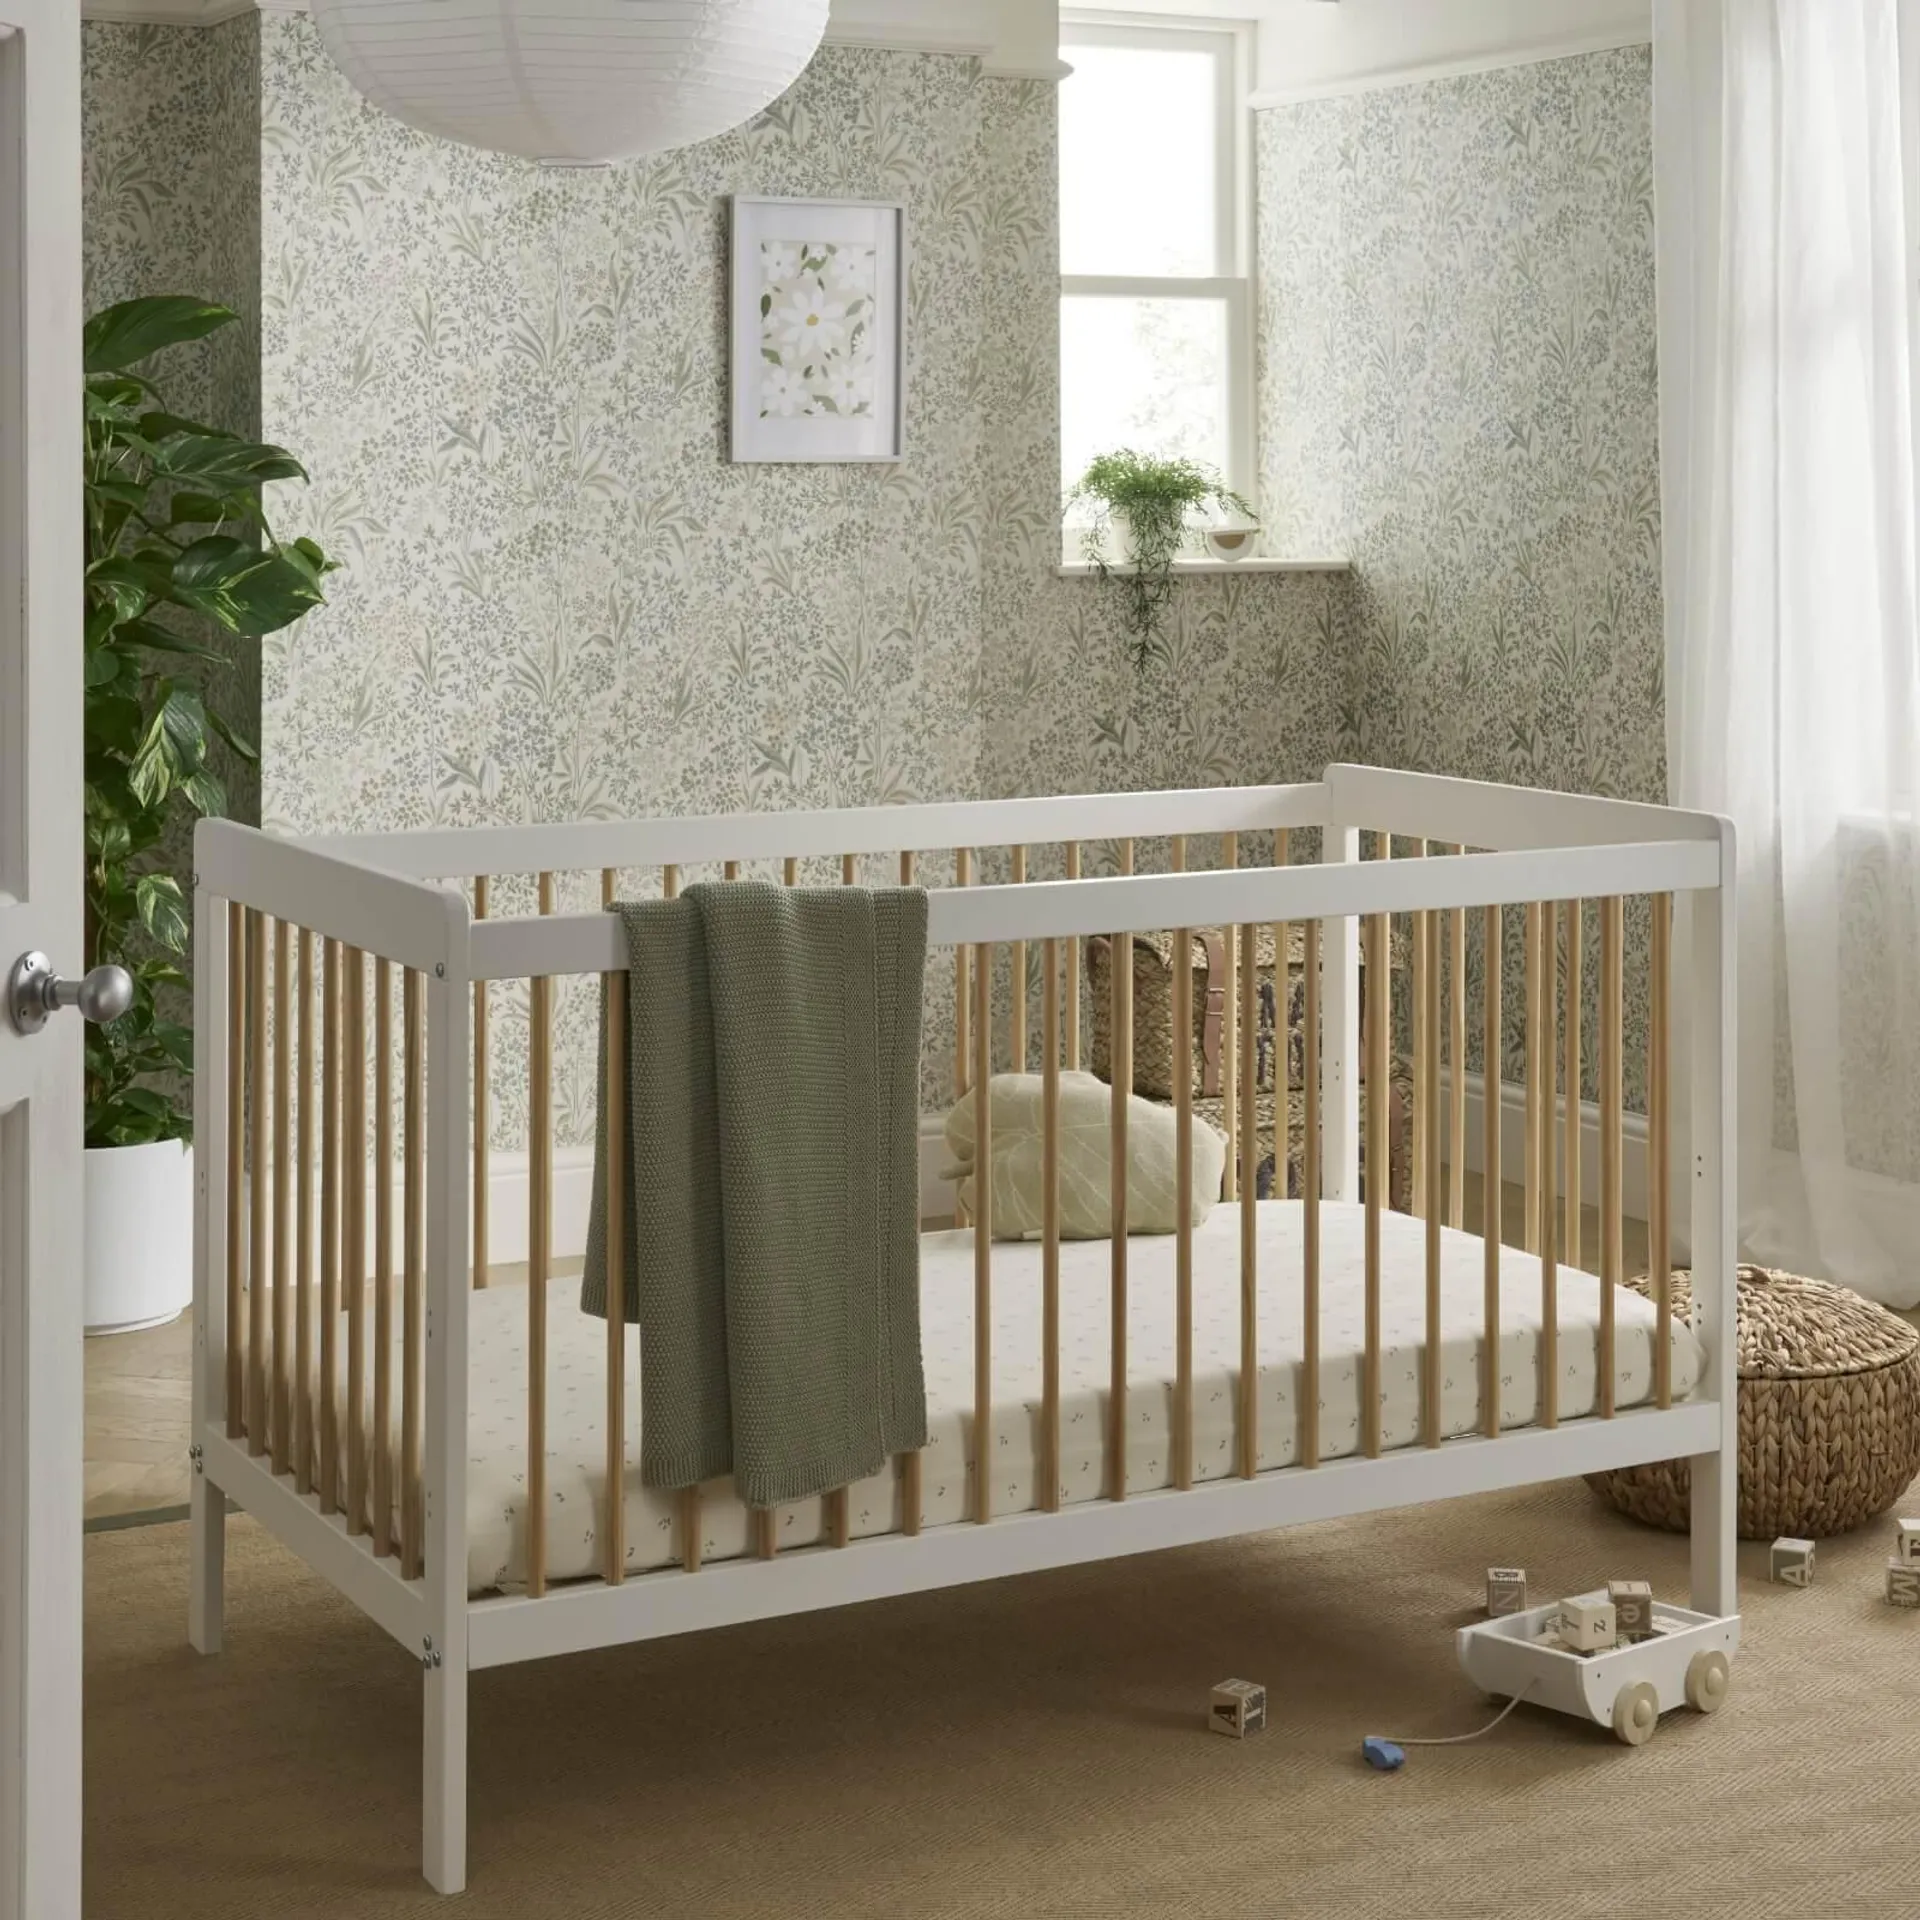 CuddleCo Nola Cot Bed in White & Natural